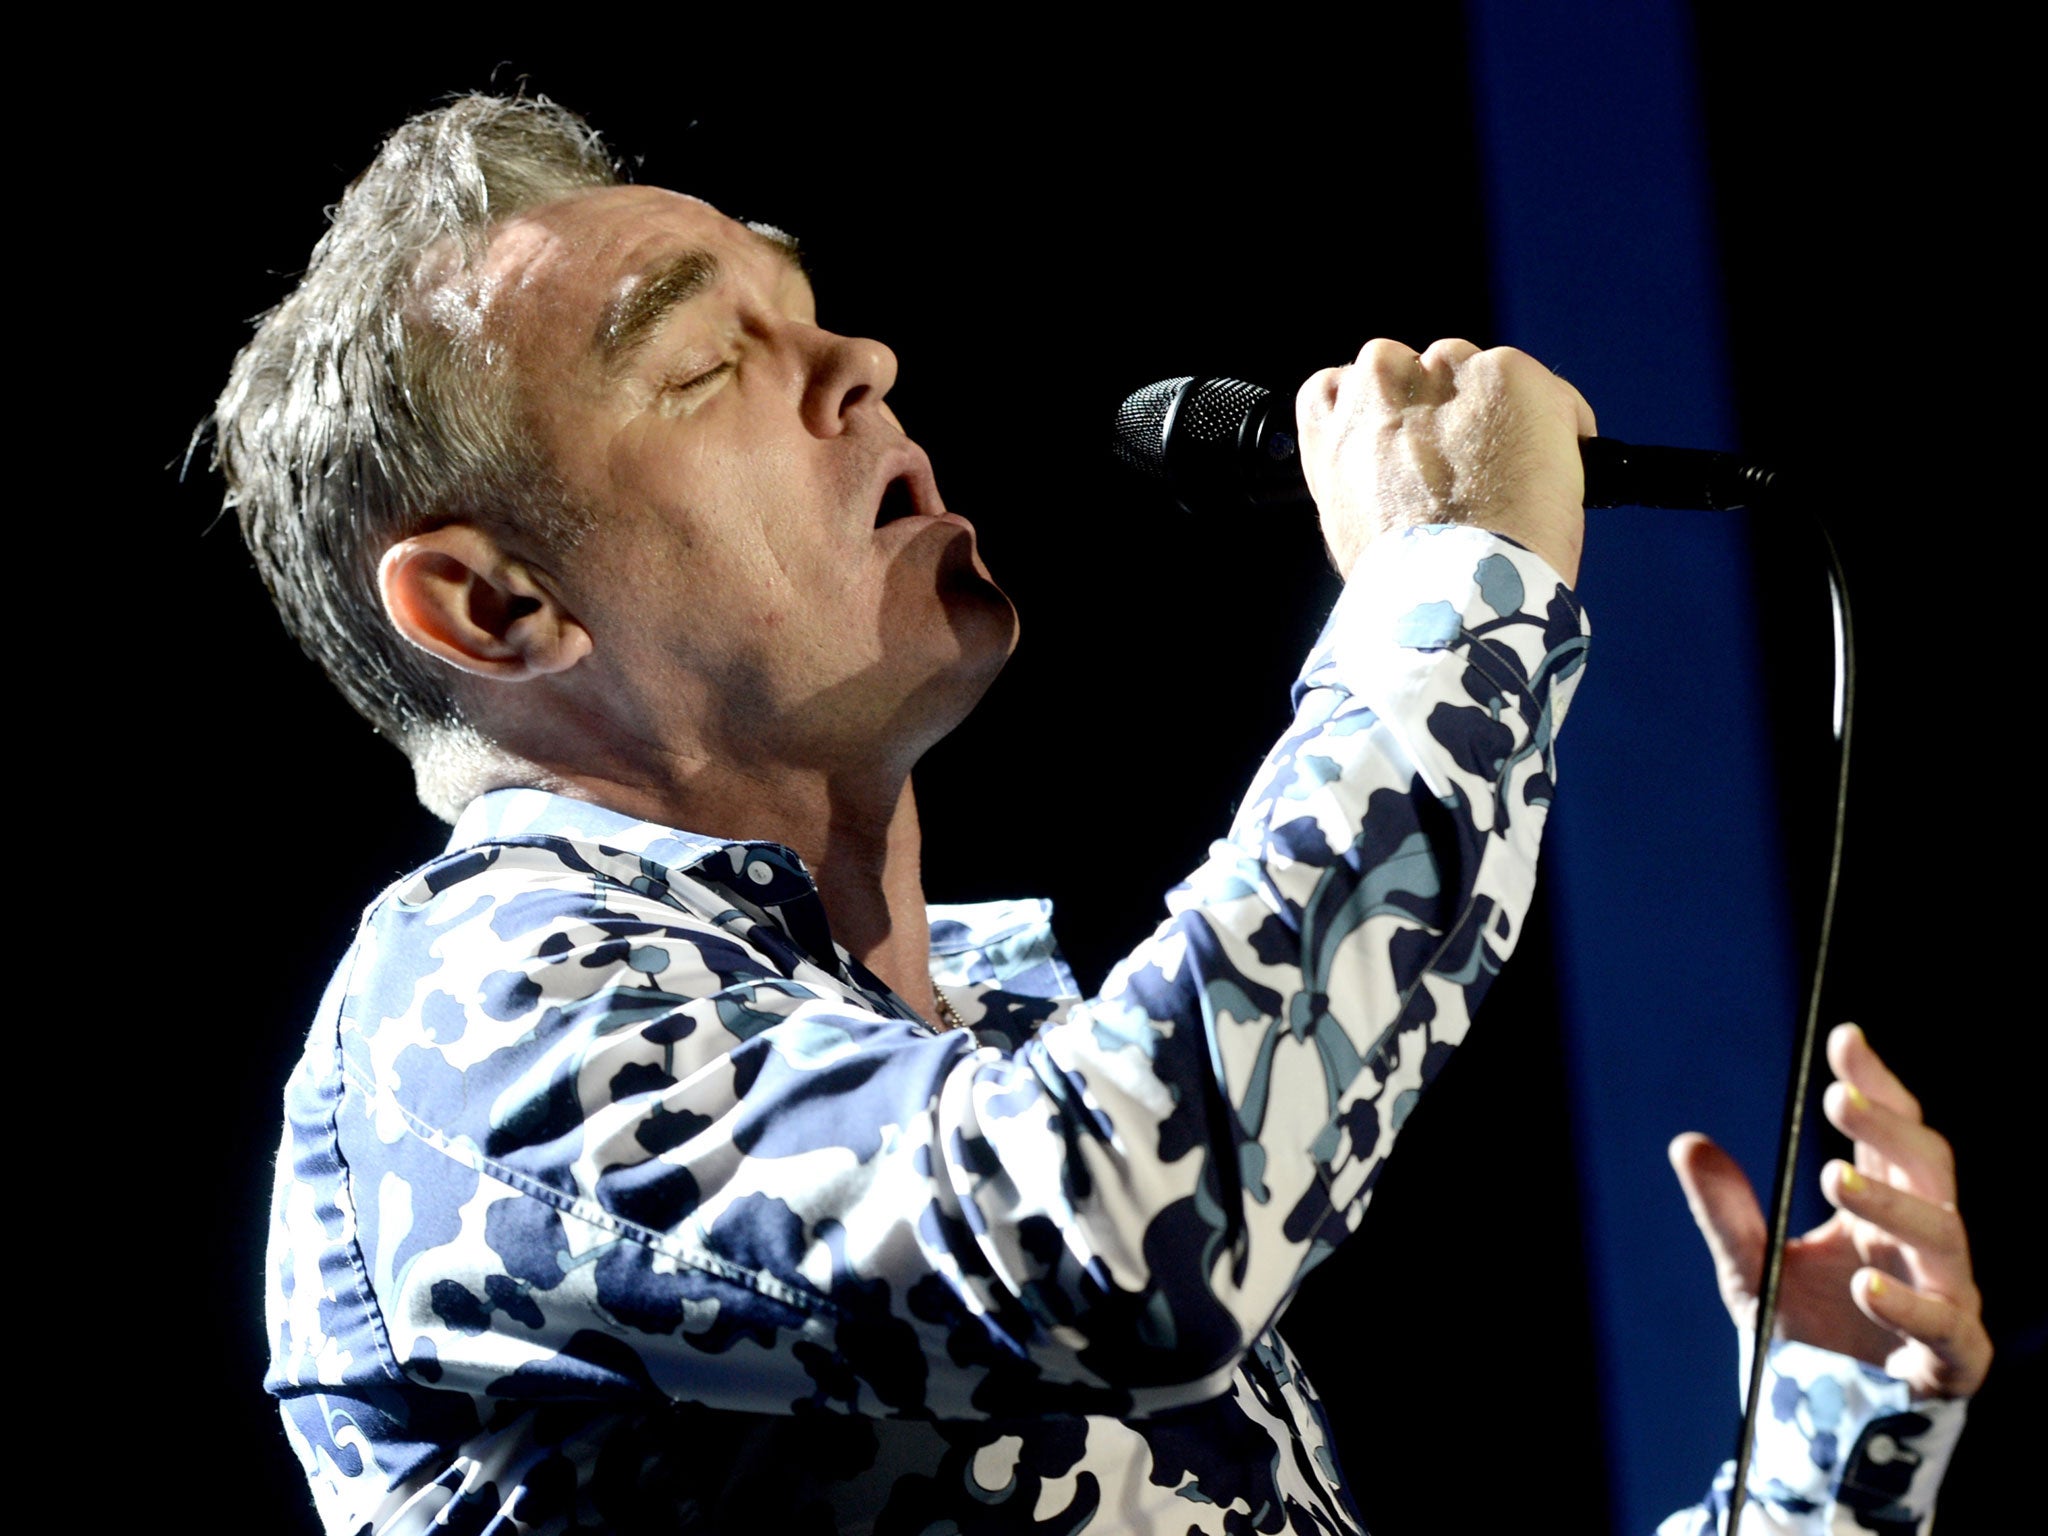 Morrisseyhas revealed Tom Jones and Cliff Richard will support him on the road in the US